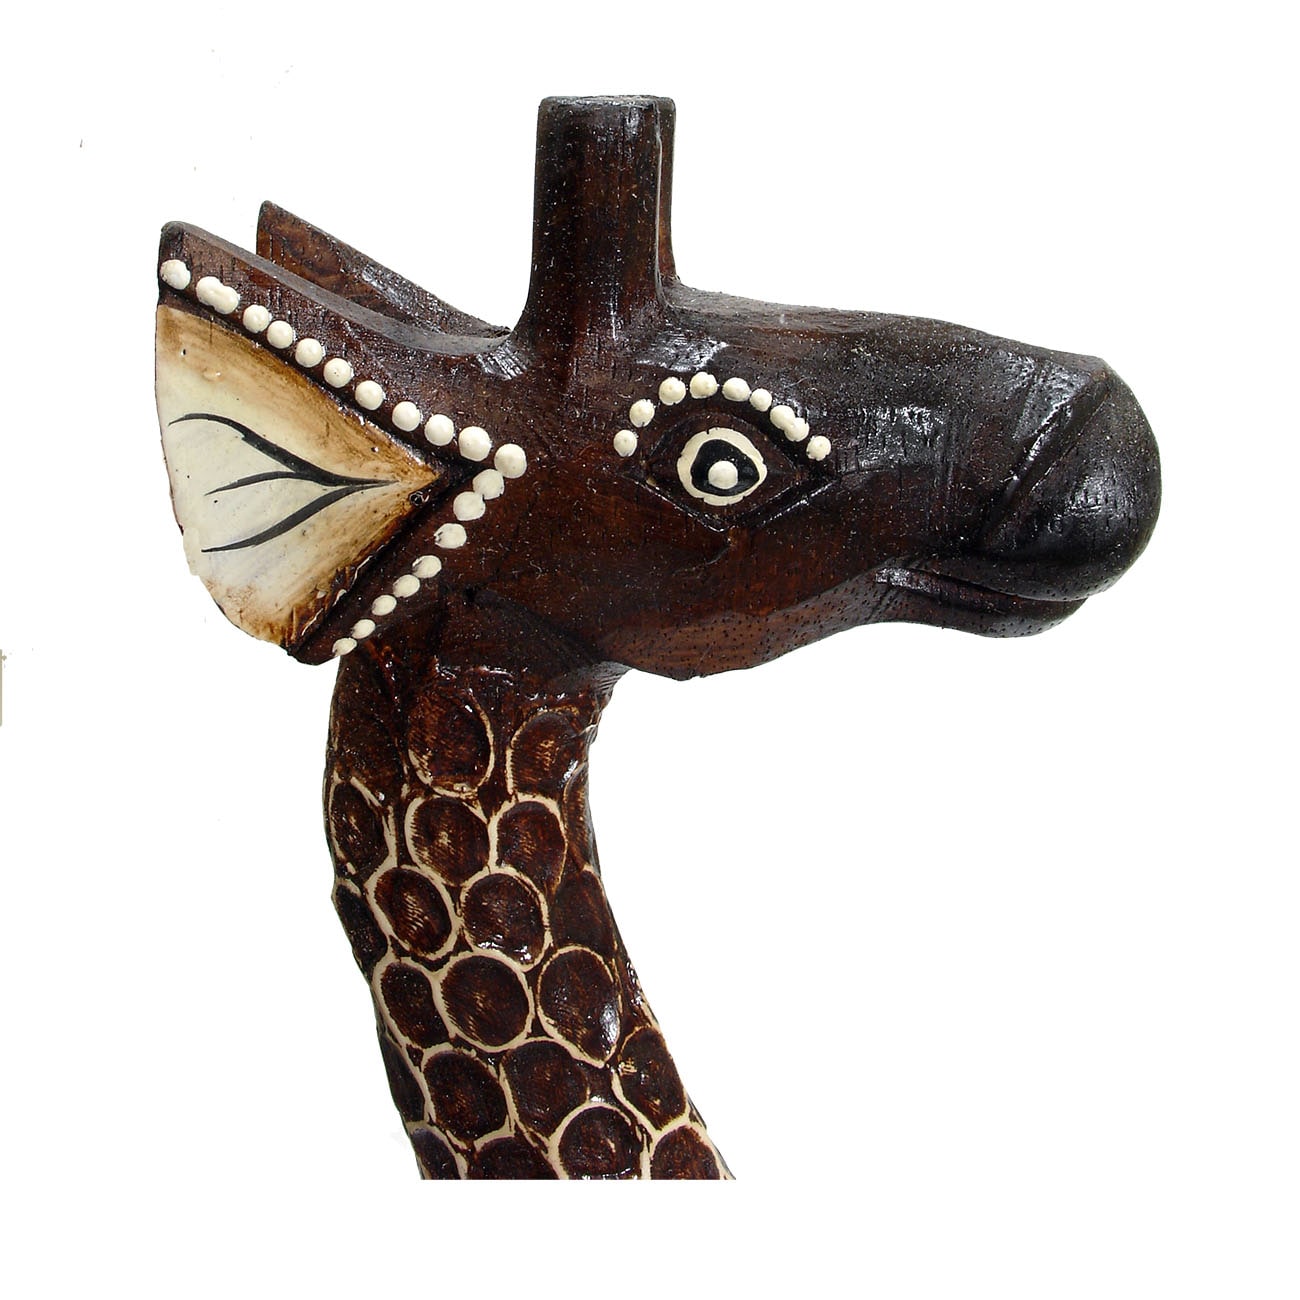 Hand-Carved Textured Wooden Giraffe Statue (Indonesia)